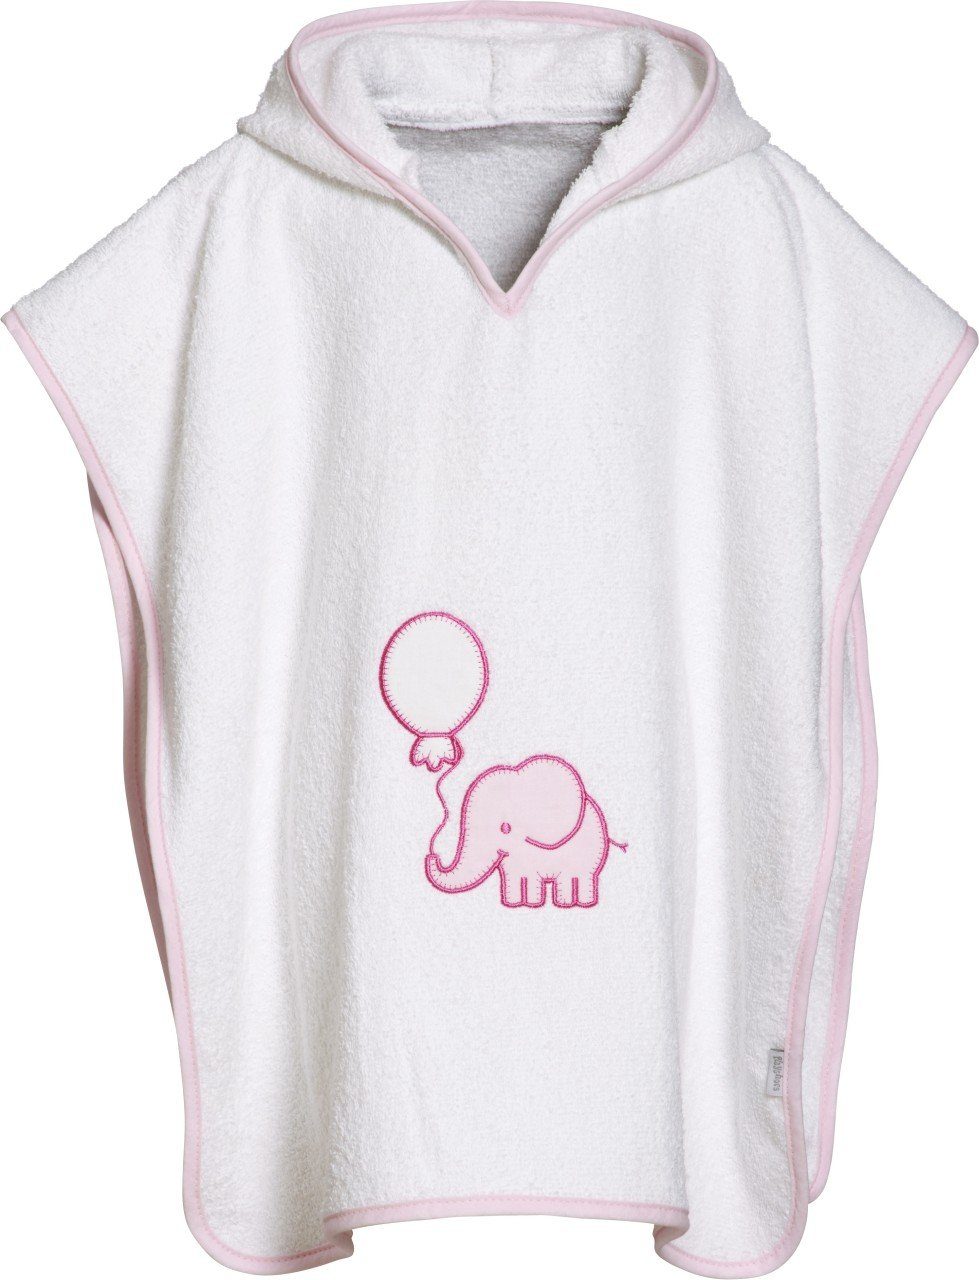 Playshoes weiß/rosa Elefant Frottee-Poncho Badeponcho